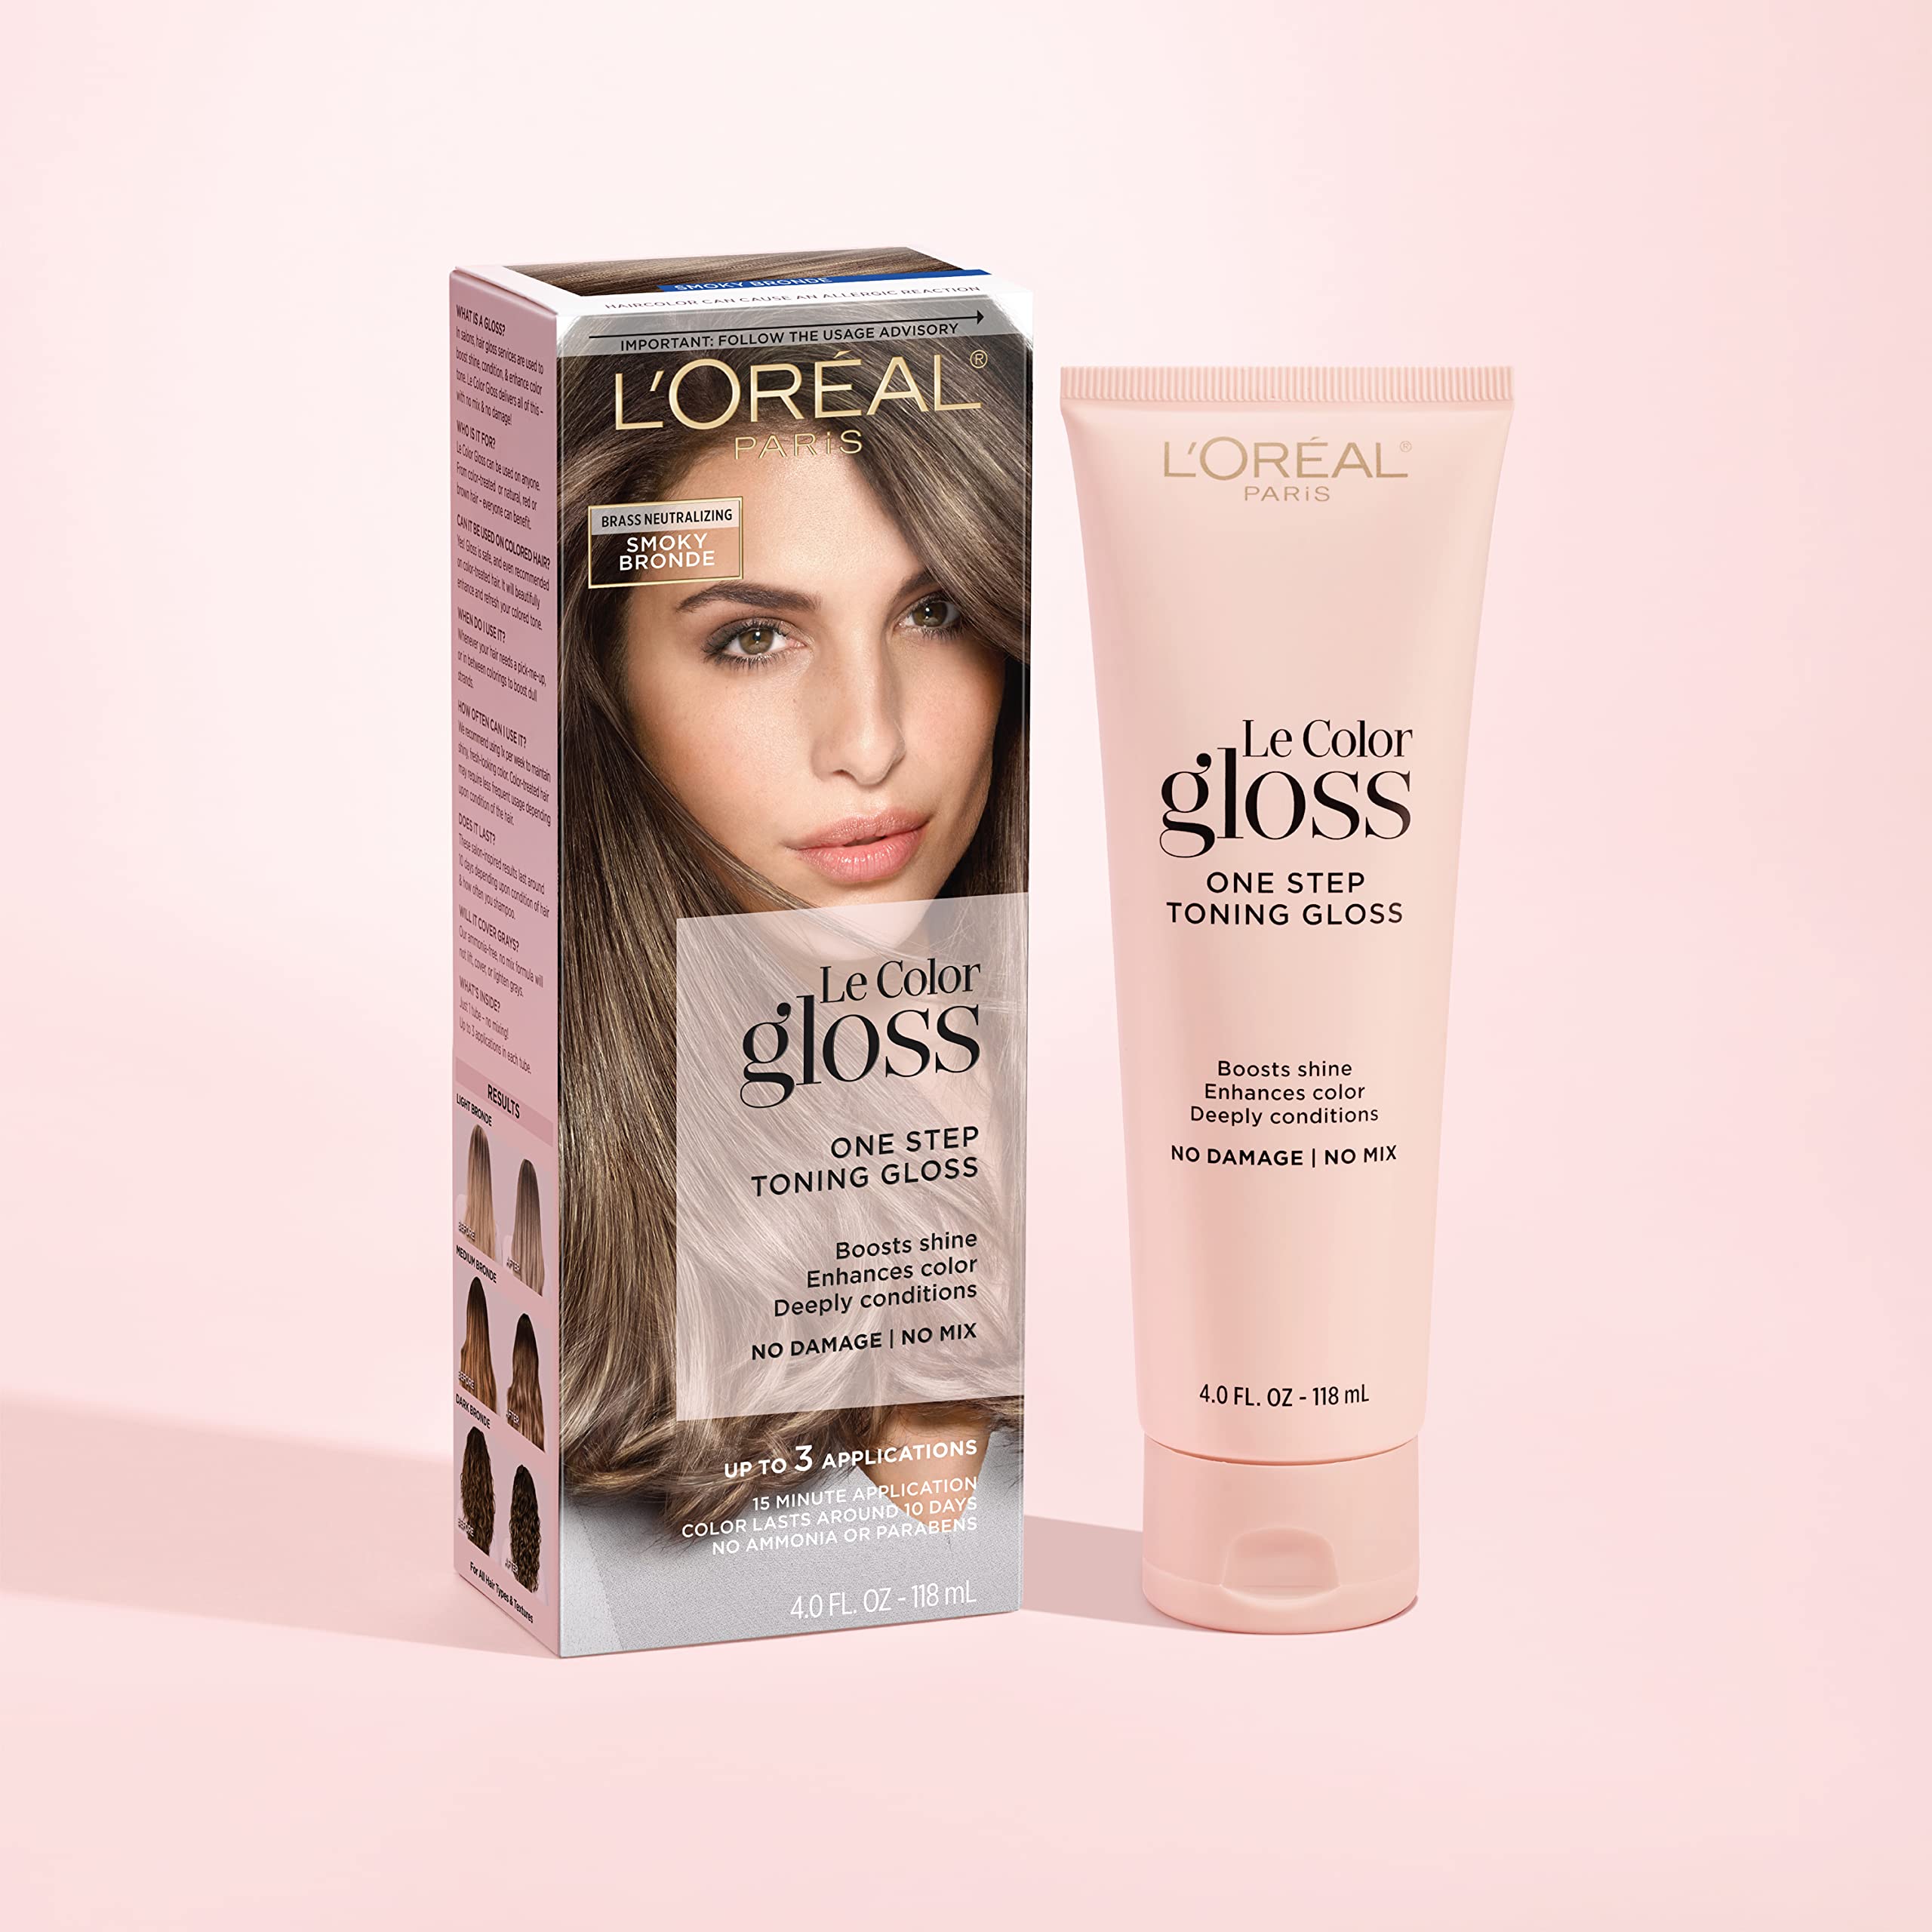 L’Oréal Paris Le Color Gloss One Step In-Shower Toning Hair Gloss, Neutralizes Brass, Conditions & Boosts Shine, Smoky Bronde, 4 Ounce